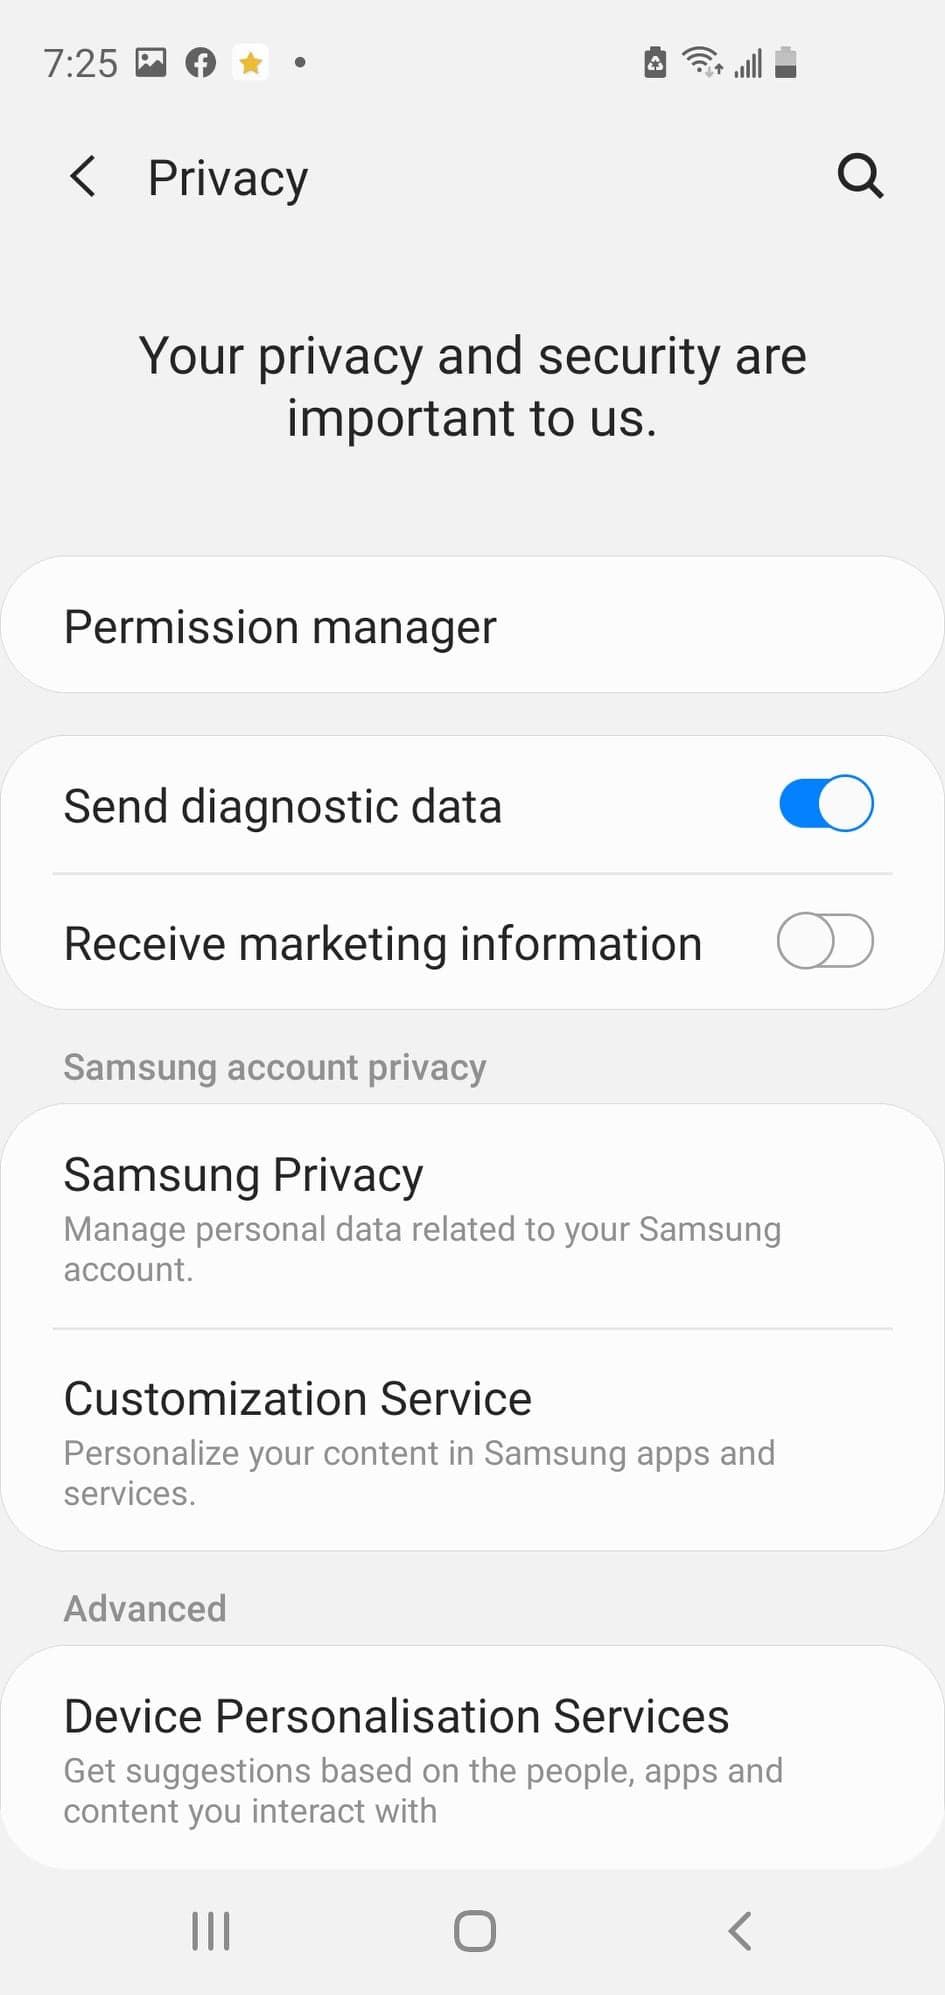 Samsung privacy settings